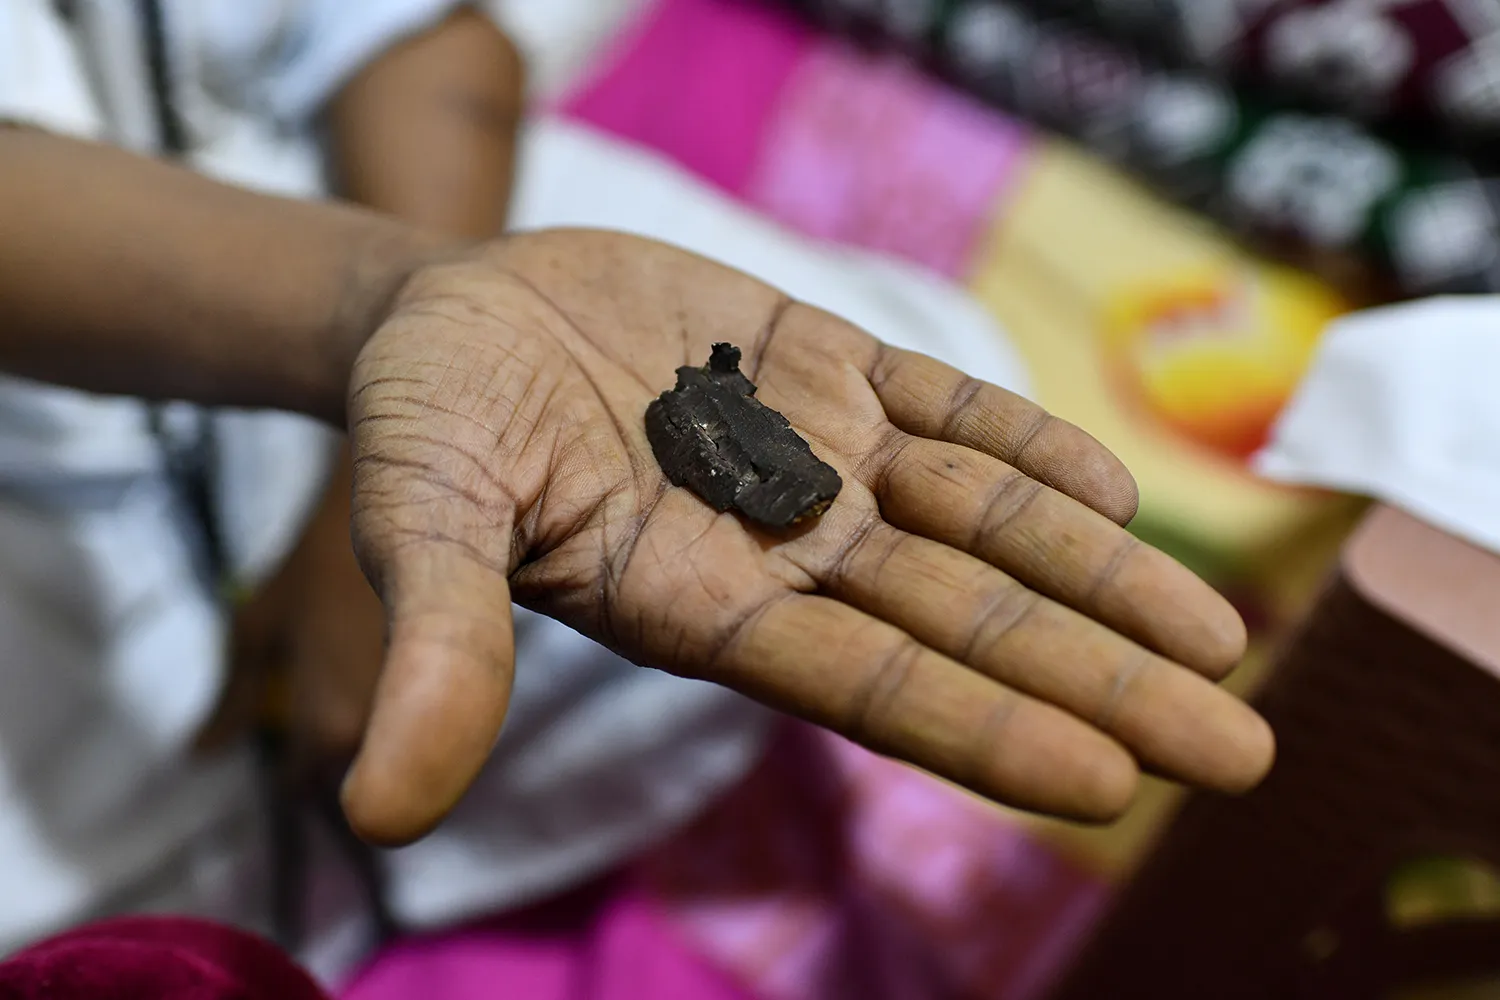 Hassan’s father holds a fragment of an artillery shell that landed in his family’s home.